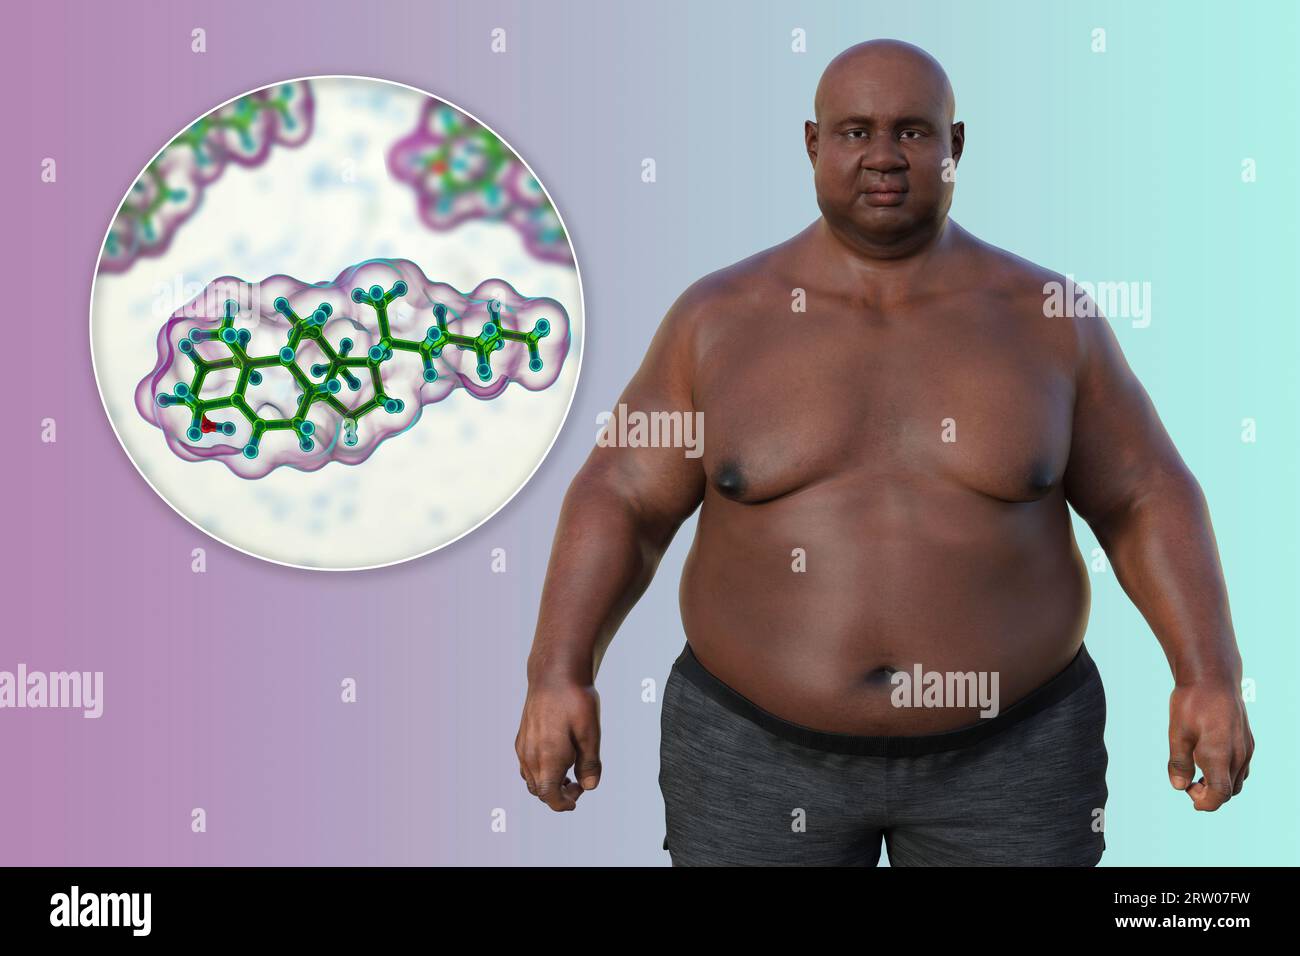 Overweight man and cholesterol molecule, illustration Stock Photo